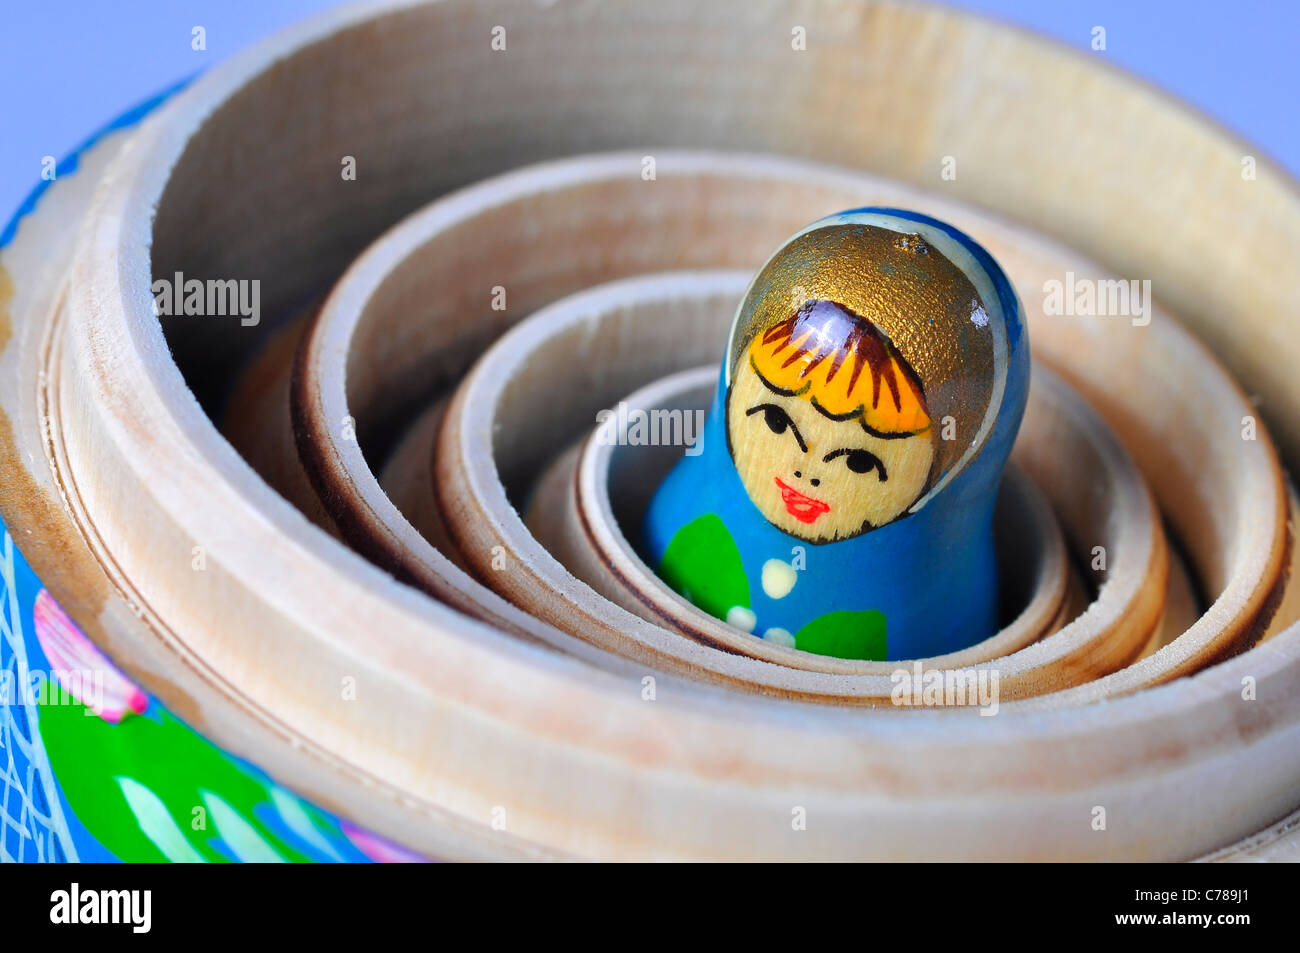 The smallest of the Matrioska Russian Dolls, inside the others Stock Photo